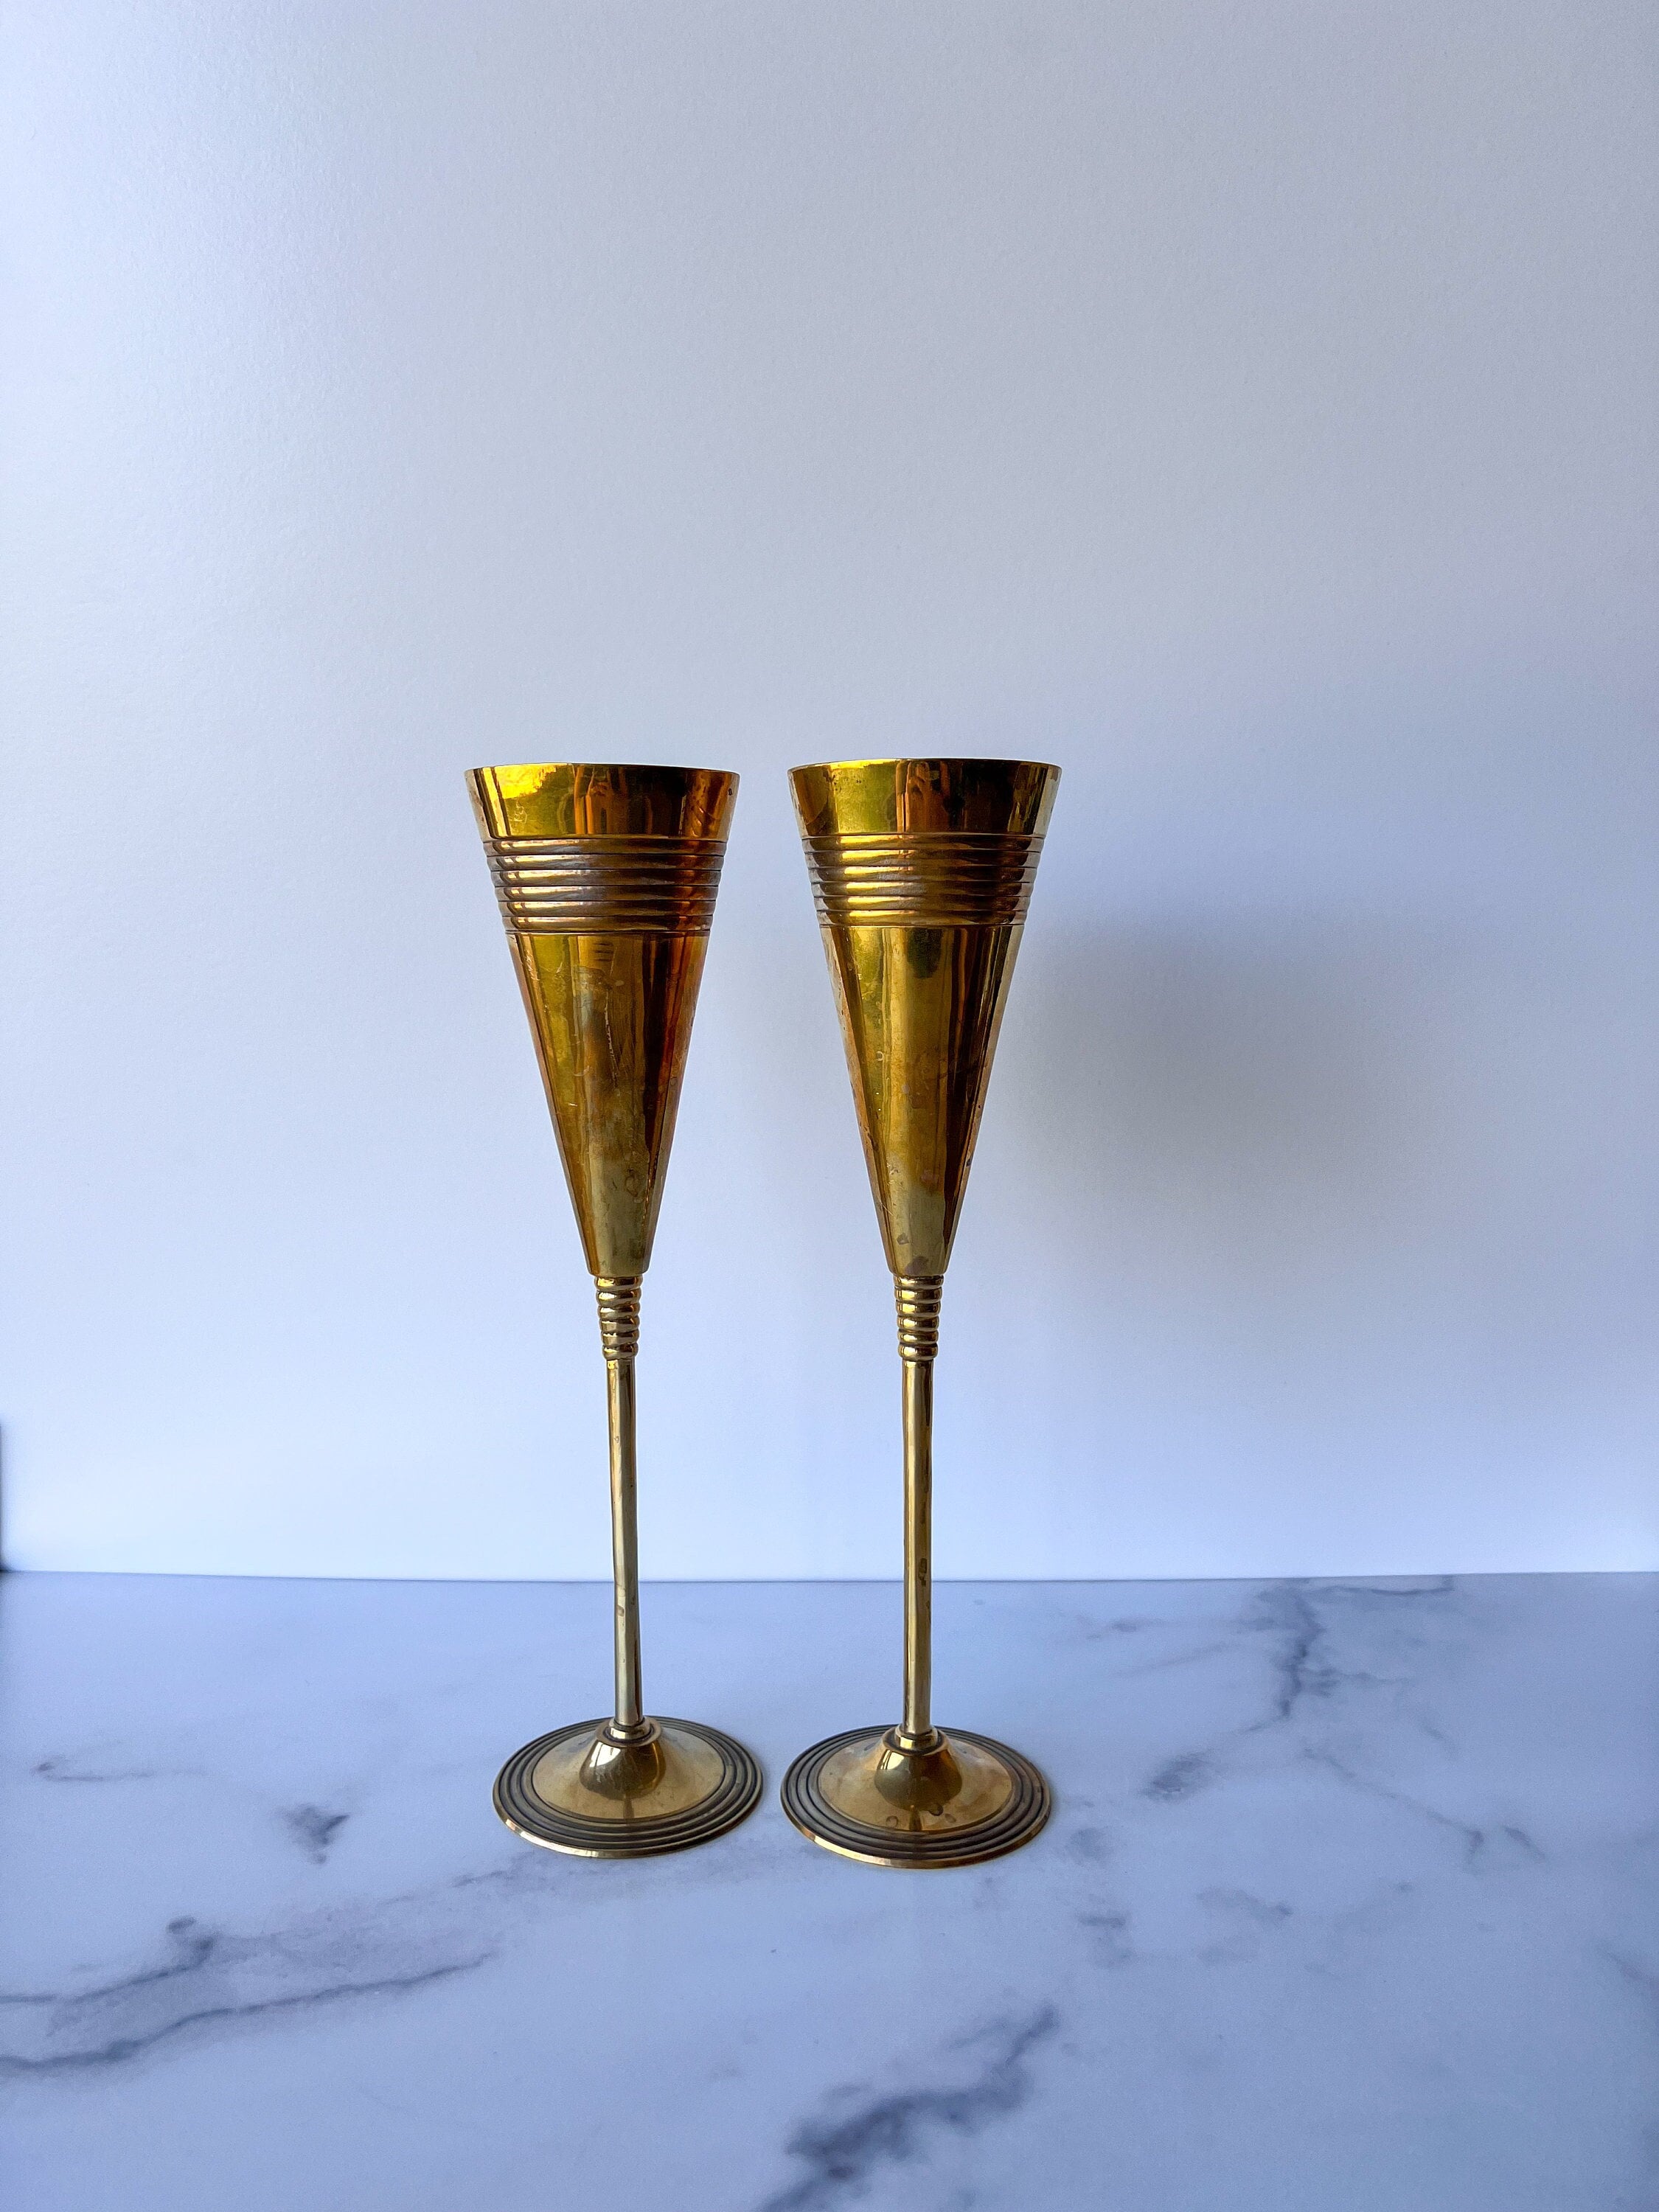 Champagne Flutes, Set of 4 Champagne Glasses Stemmed Toasting Drinkware with Decorative Brass Metal Hammered Style Base